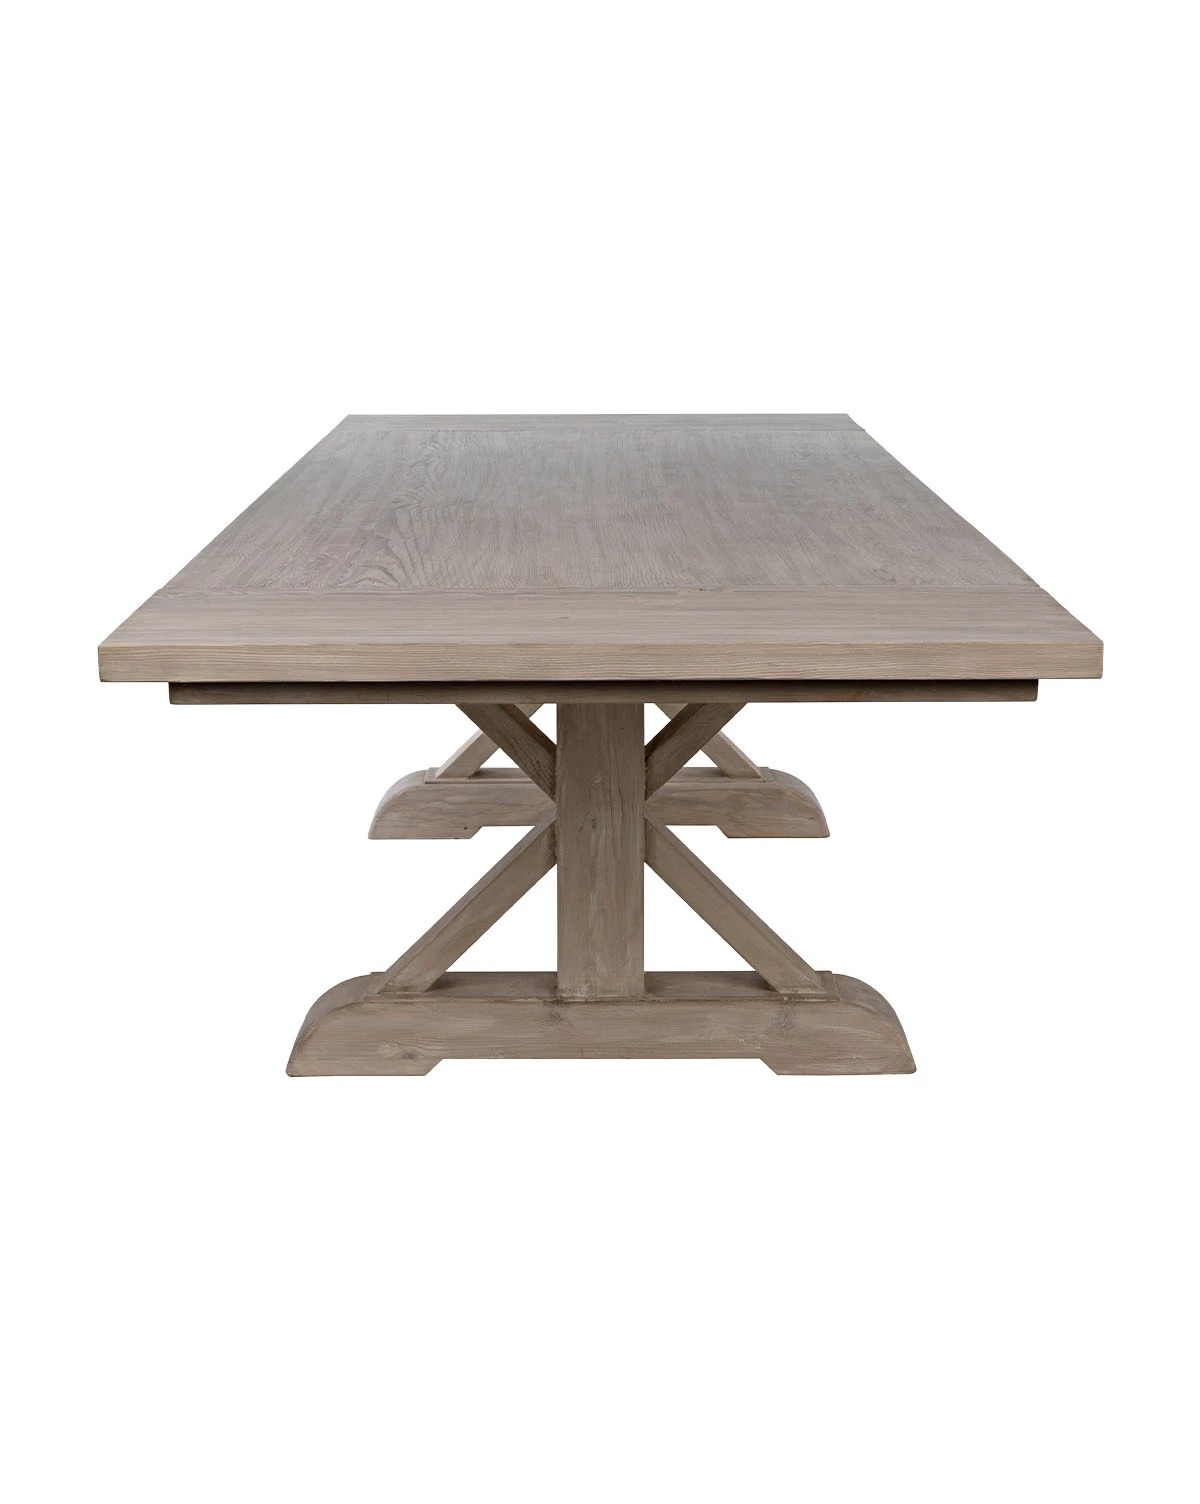 HOLLAND EXTENSION DINING TABLE - Image 1